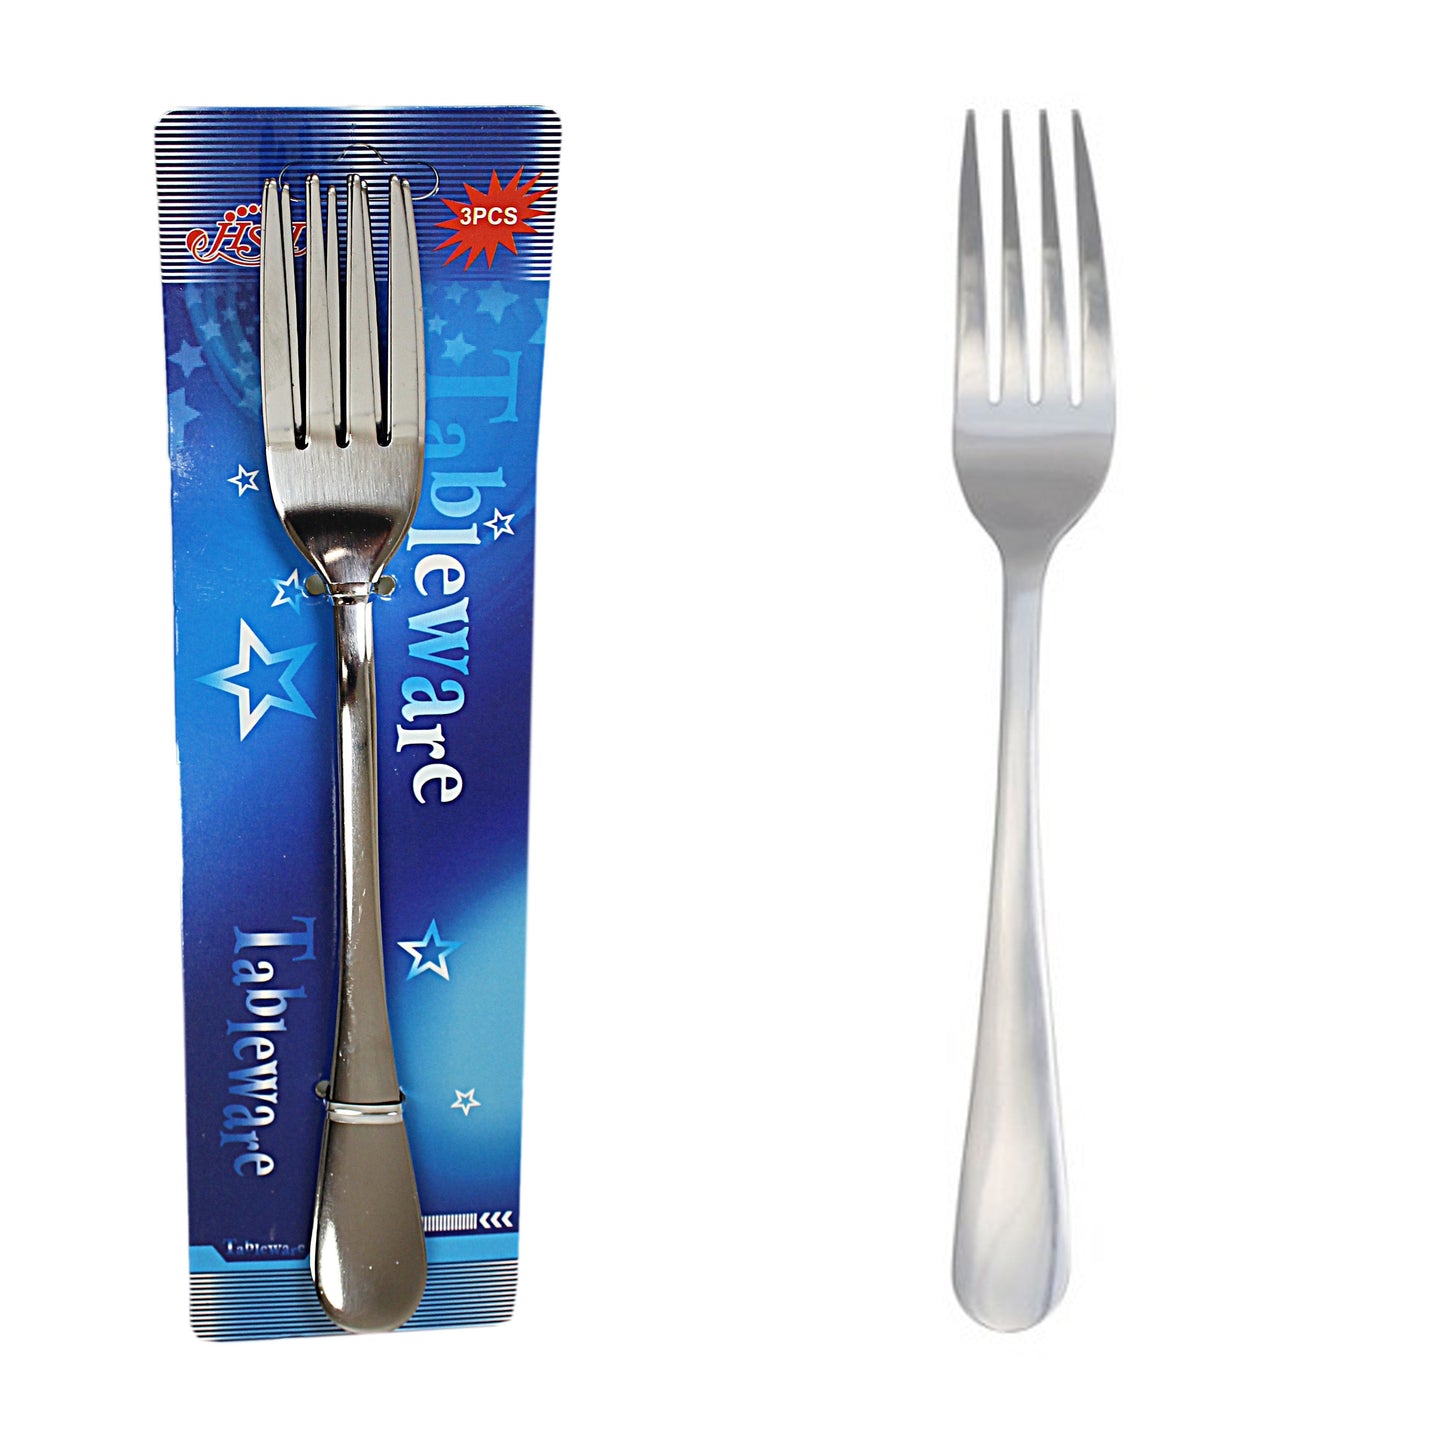 High Quality Steel Kitchen Forks Pack Of 3 2743 (Large Letter Rate)